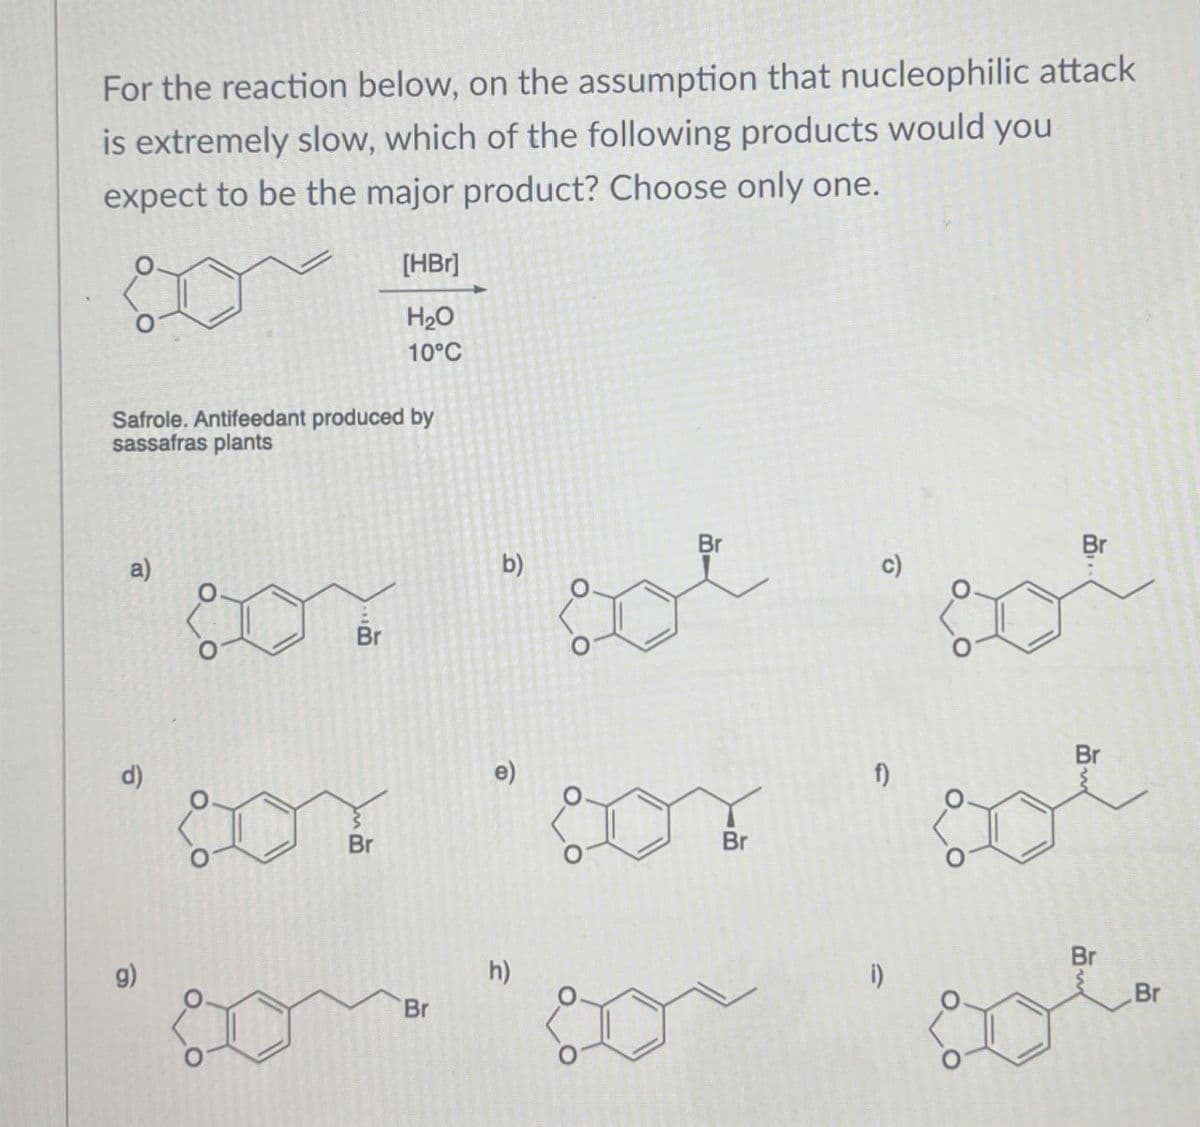 For the reaction below, on the assumption that nucleophilic attack
is extremely slow, which of the following products would you
expect to be the major product? Choose only one.
[HBr]
H₂O
10°C
Safrole. Antifeedant produced by
sassafras plants
d)
a)
Br
Br
g)
Br
h)
Br
b)
DY
Br
c)
Br
f)
Br
Br
201
Br